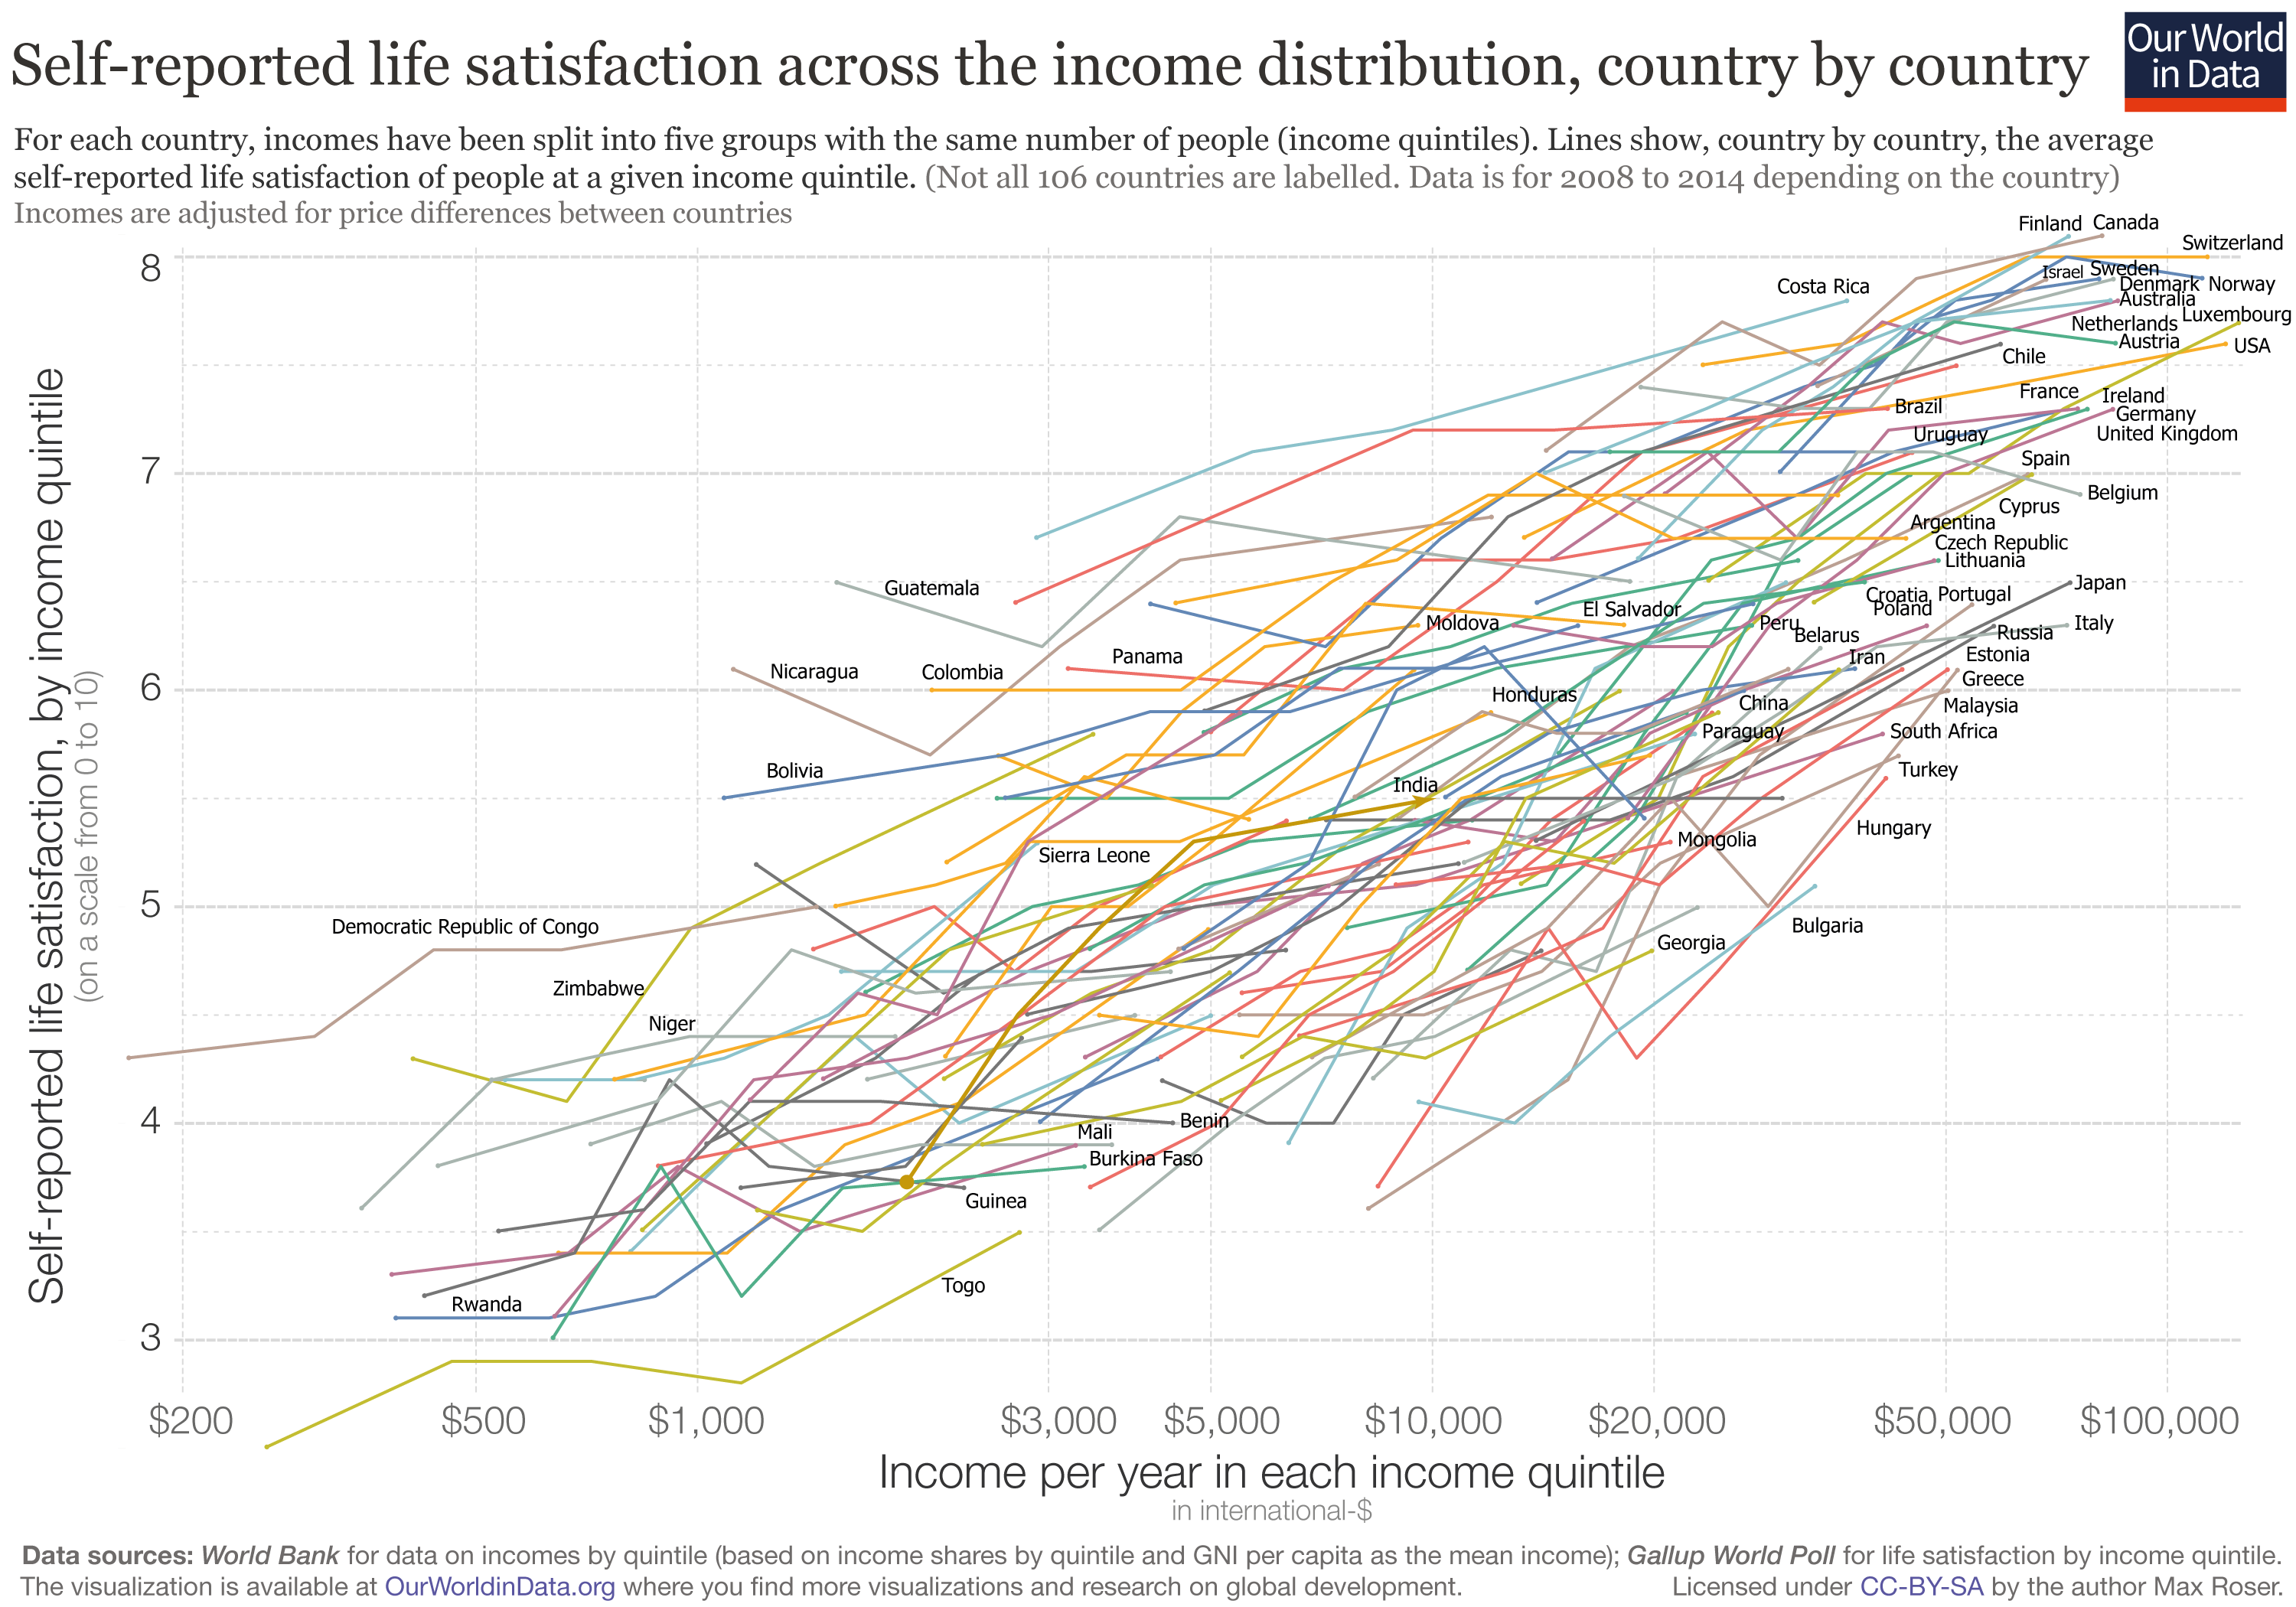 Self-reported life satisfaction across the income distribution, country by country